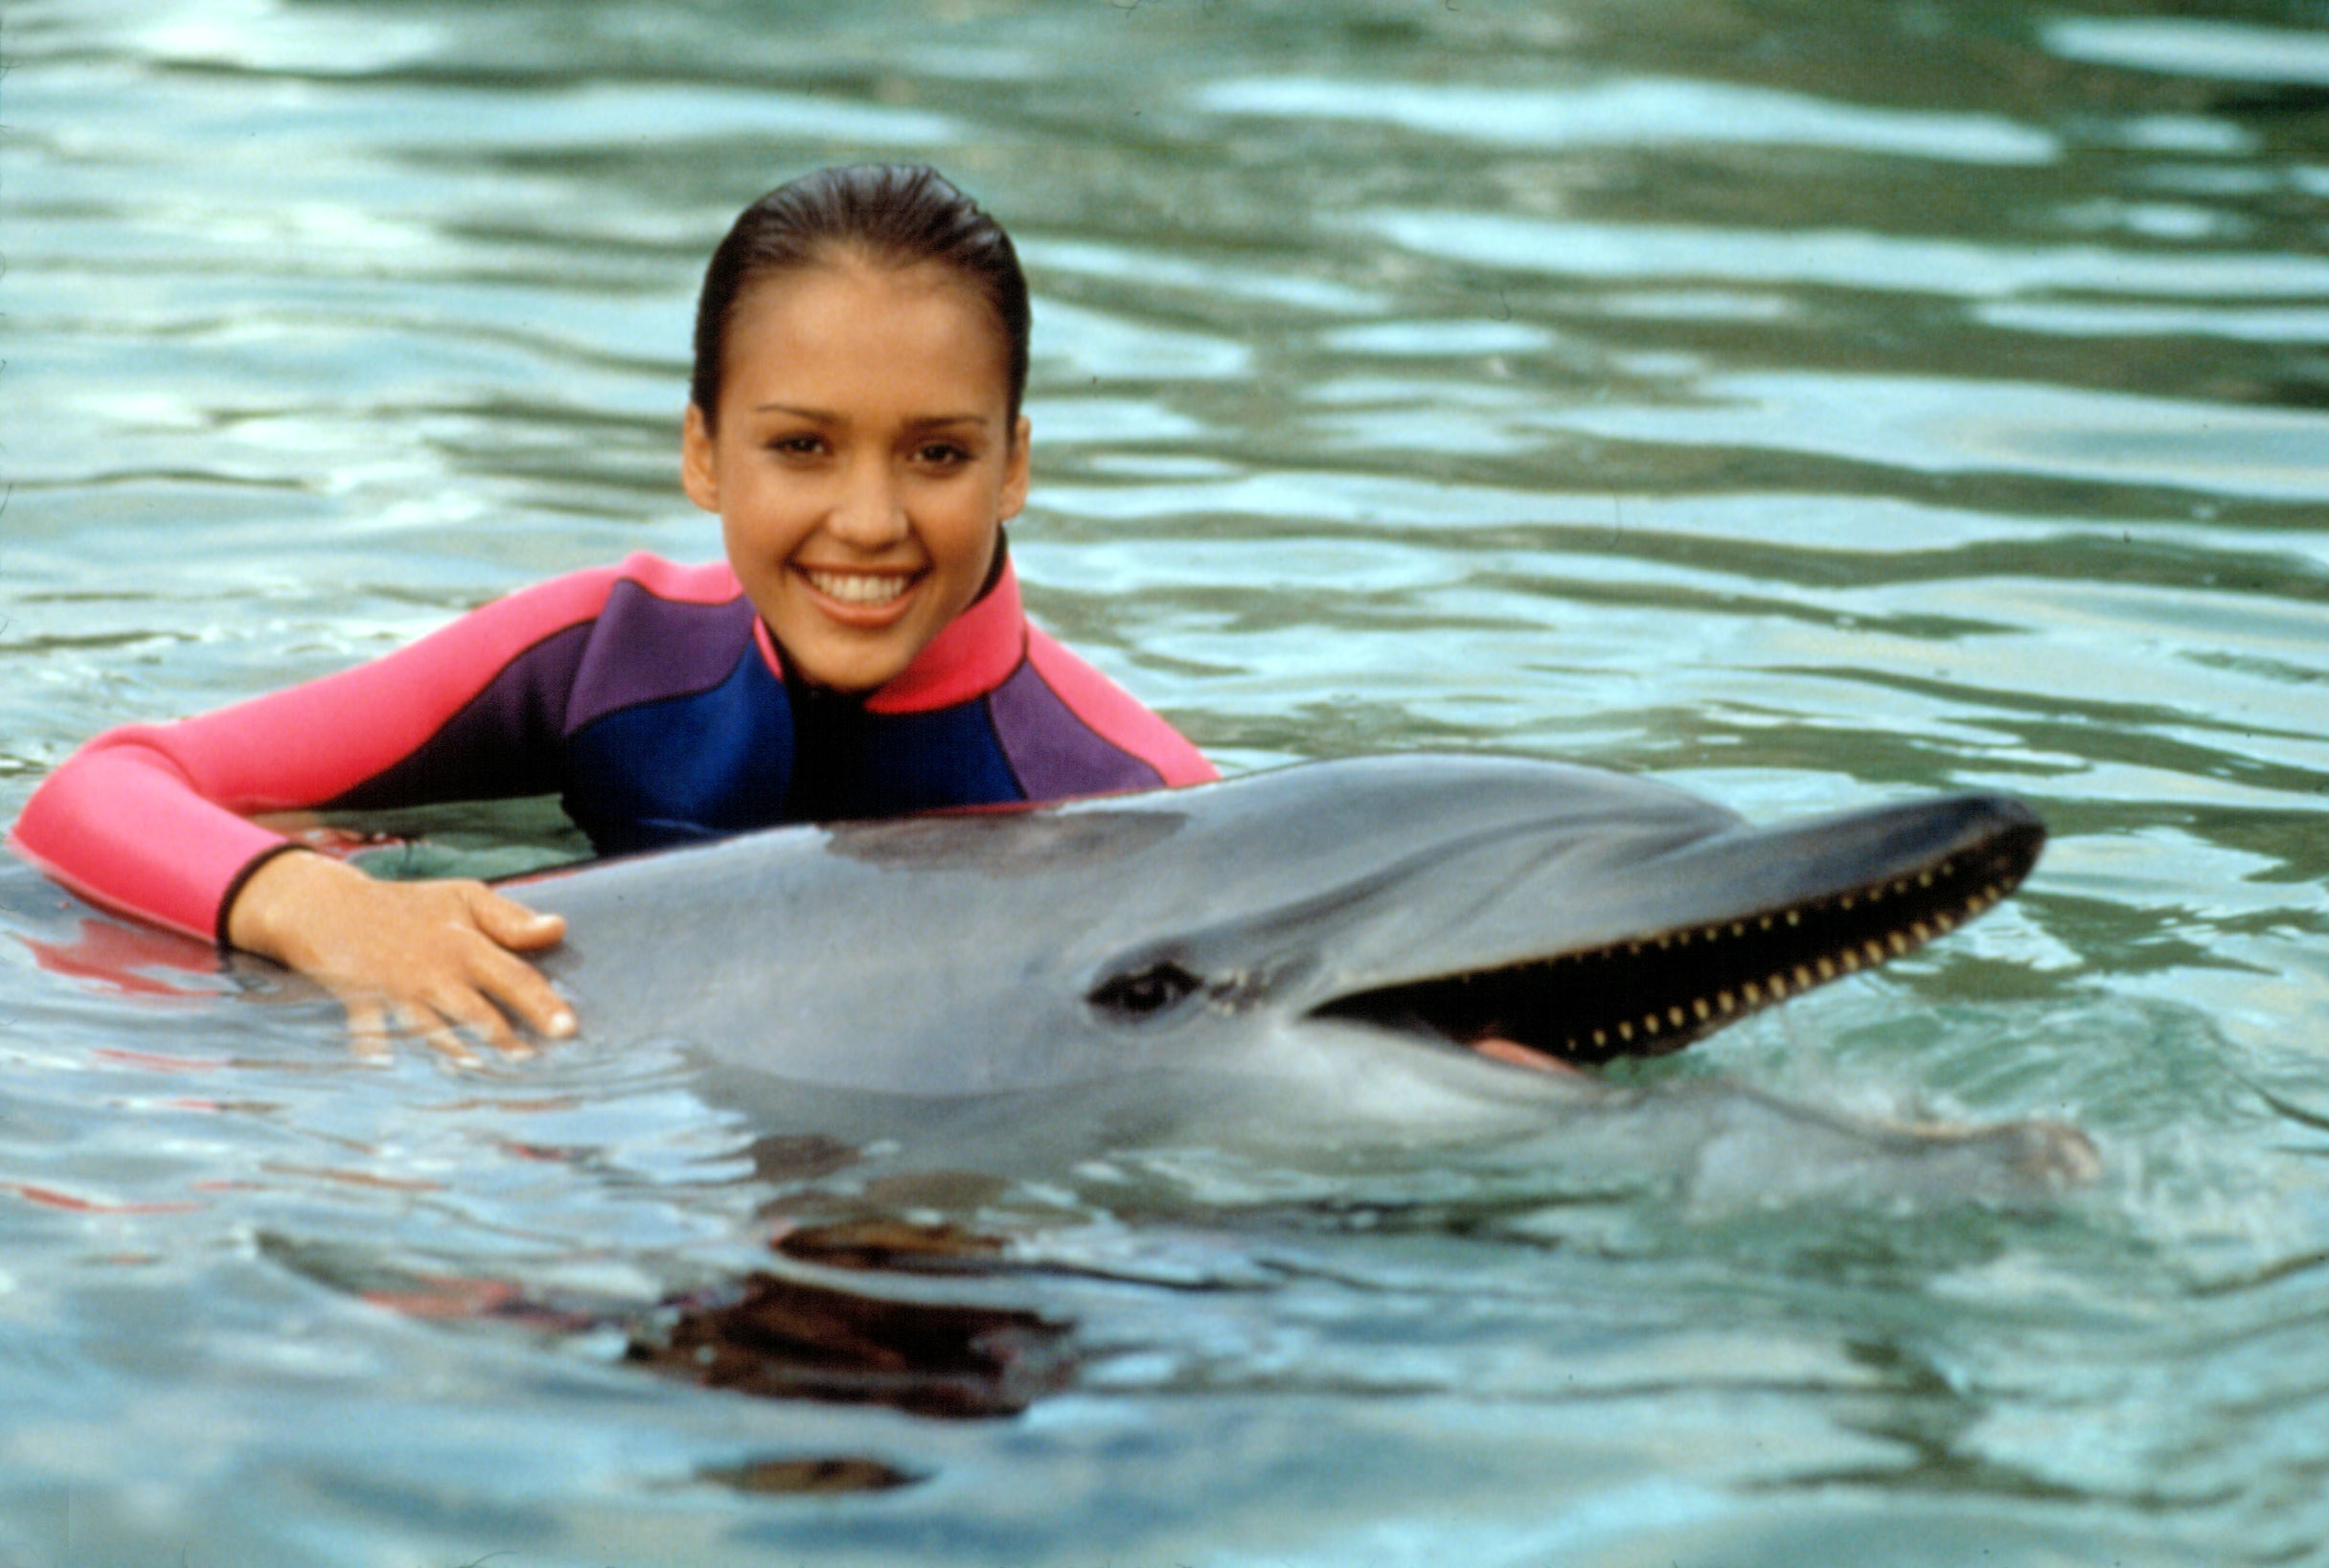 Alba in the water with Flipper